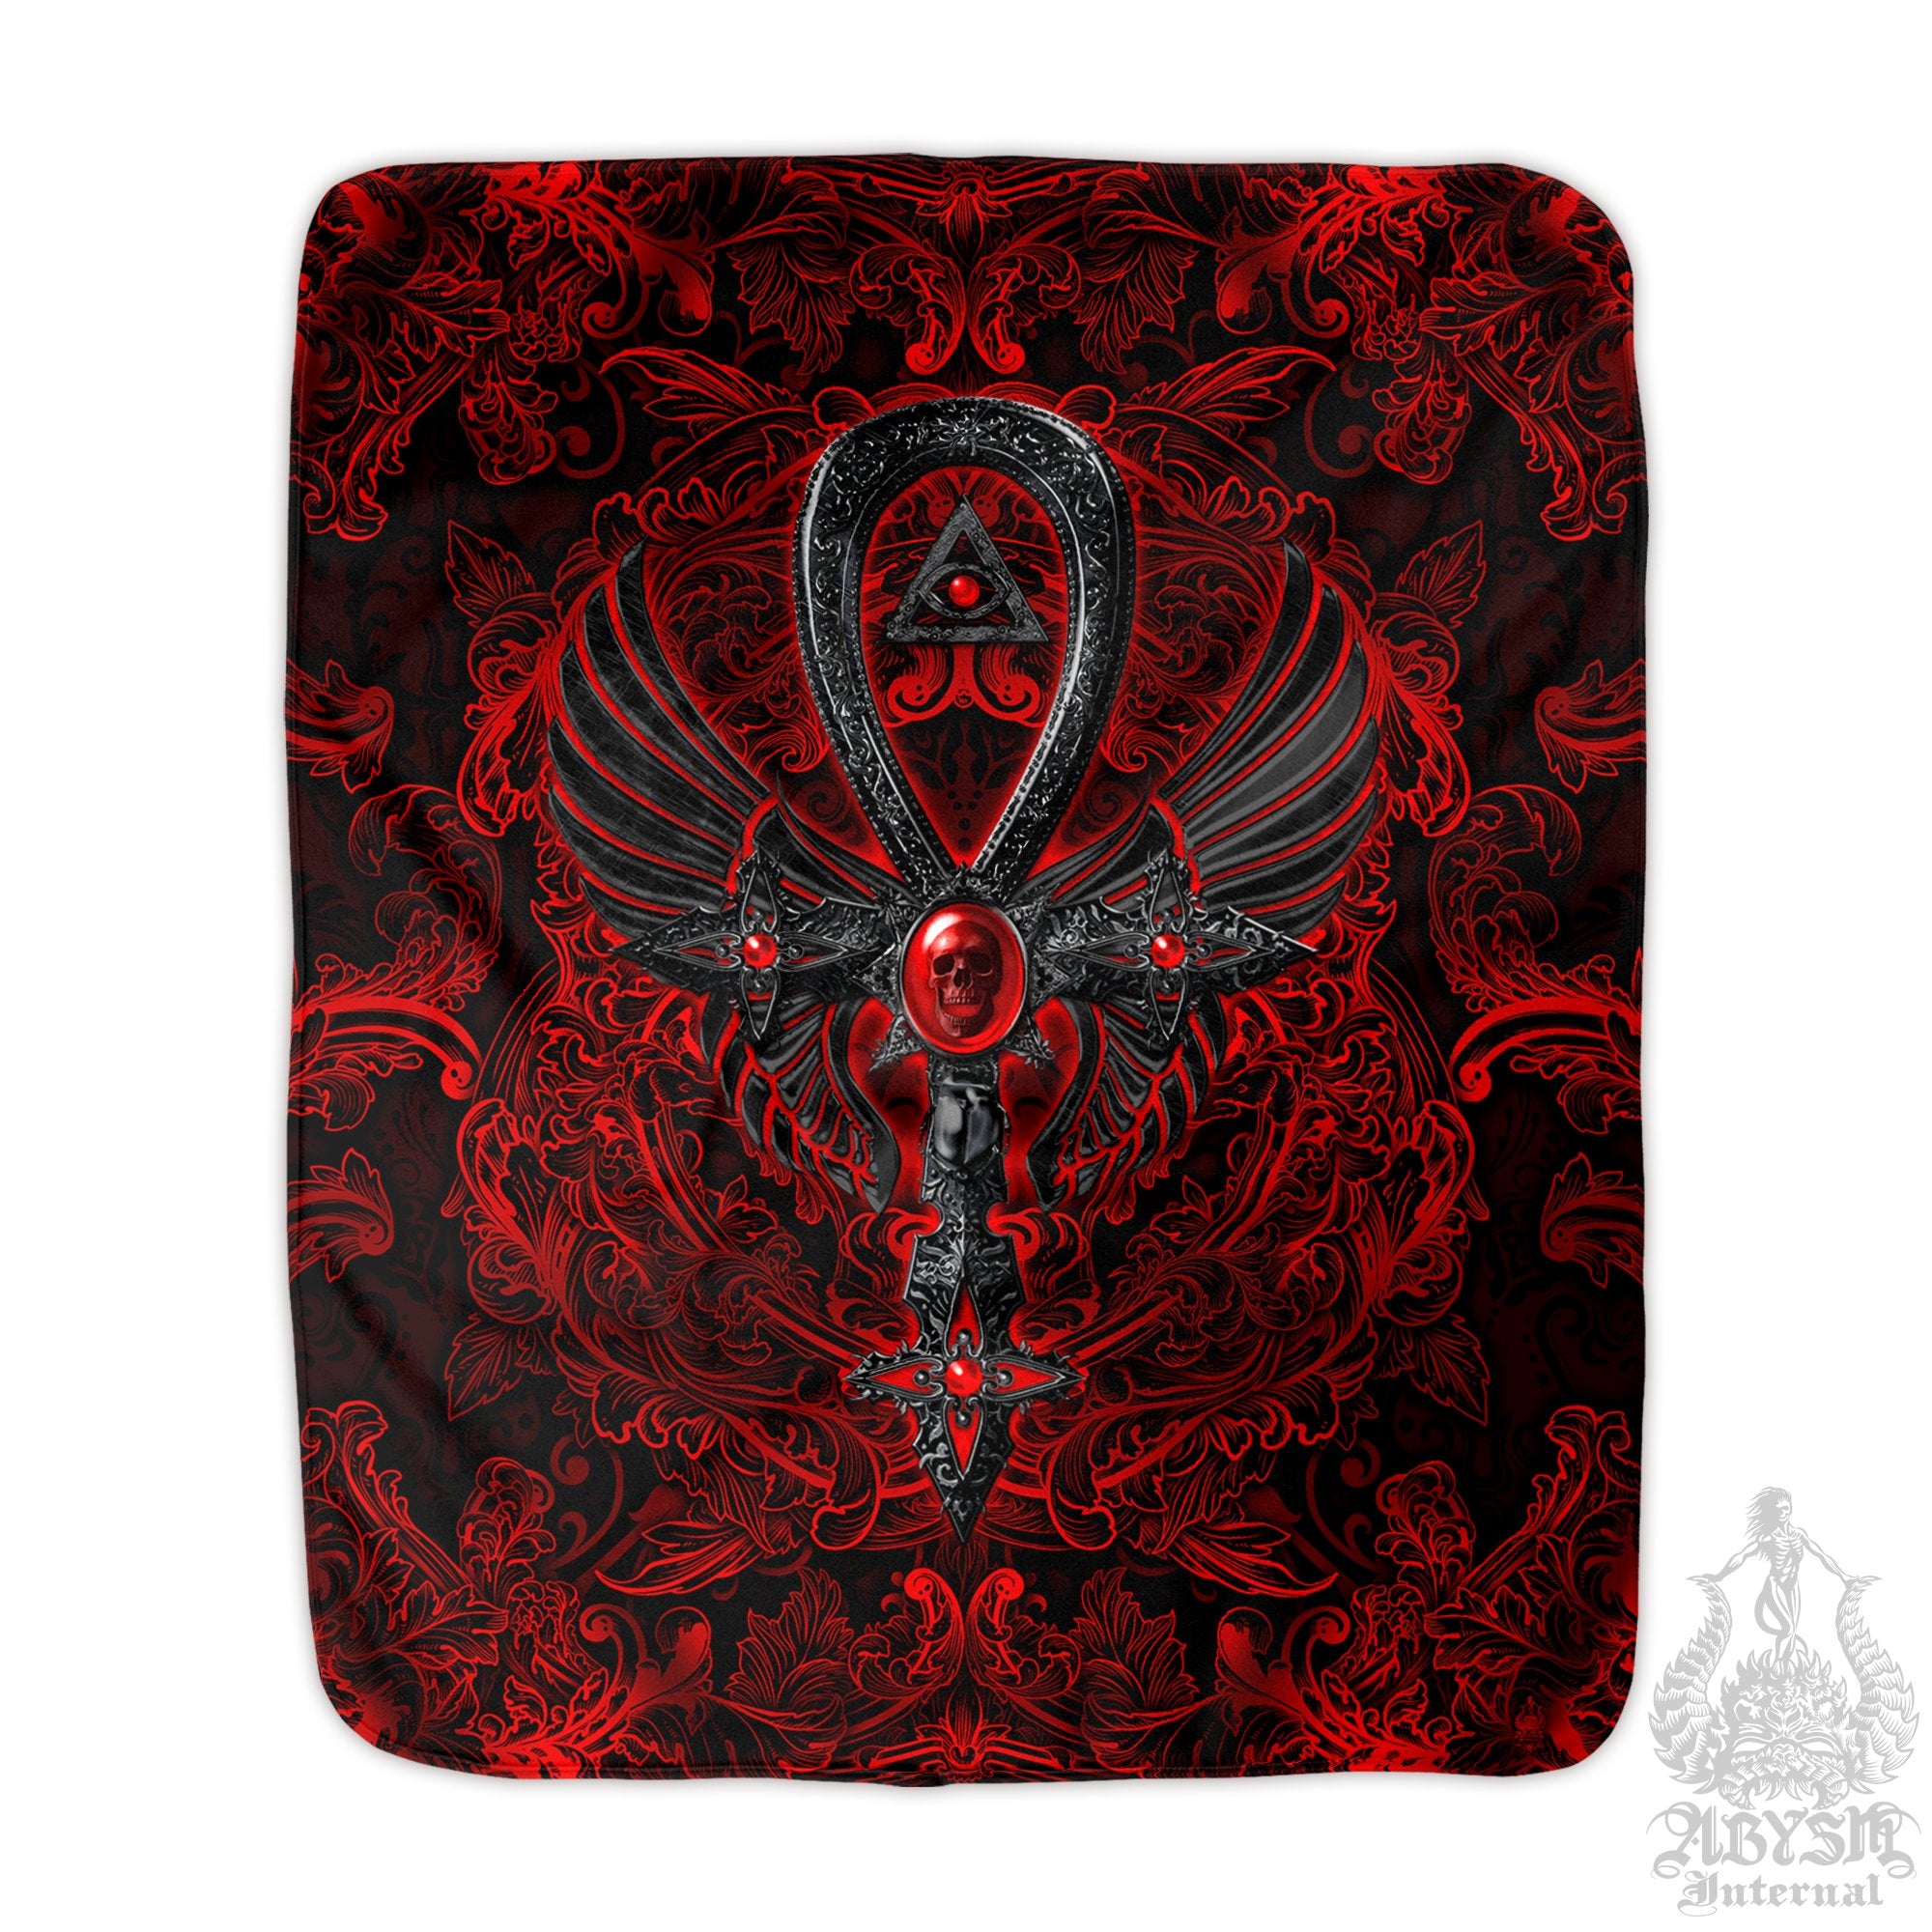 Bloody Goth Sherpa Fleece Throw Blanket, Gothic Home Decor, Alternative Art Gift - Ankh Cross, Dark Red, Black and Gold, 3 Colors - Abysm Internal